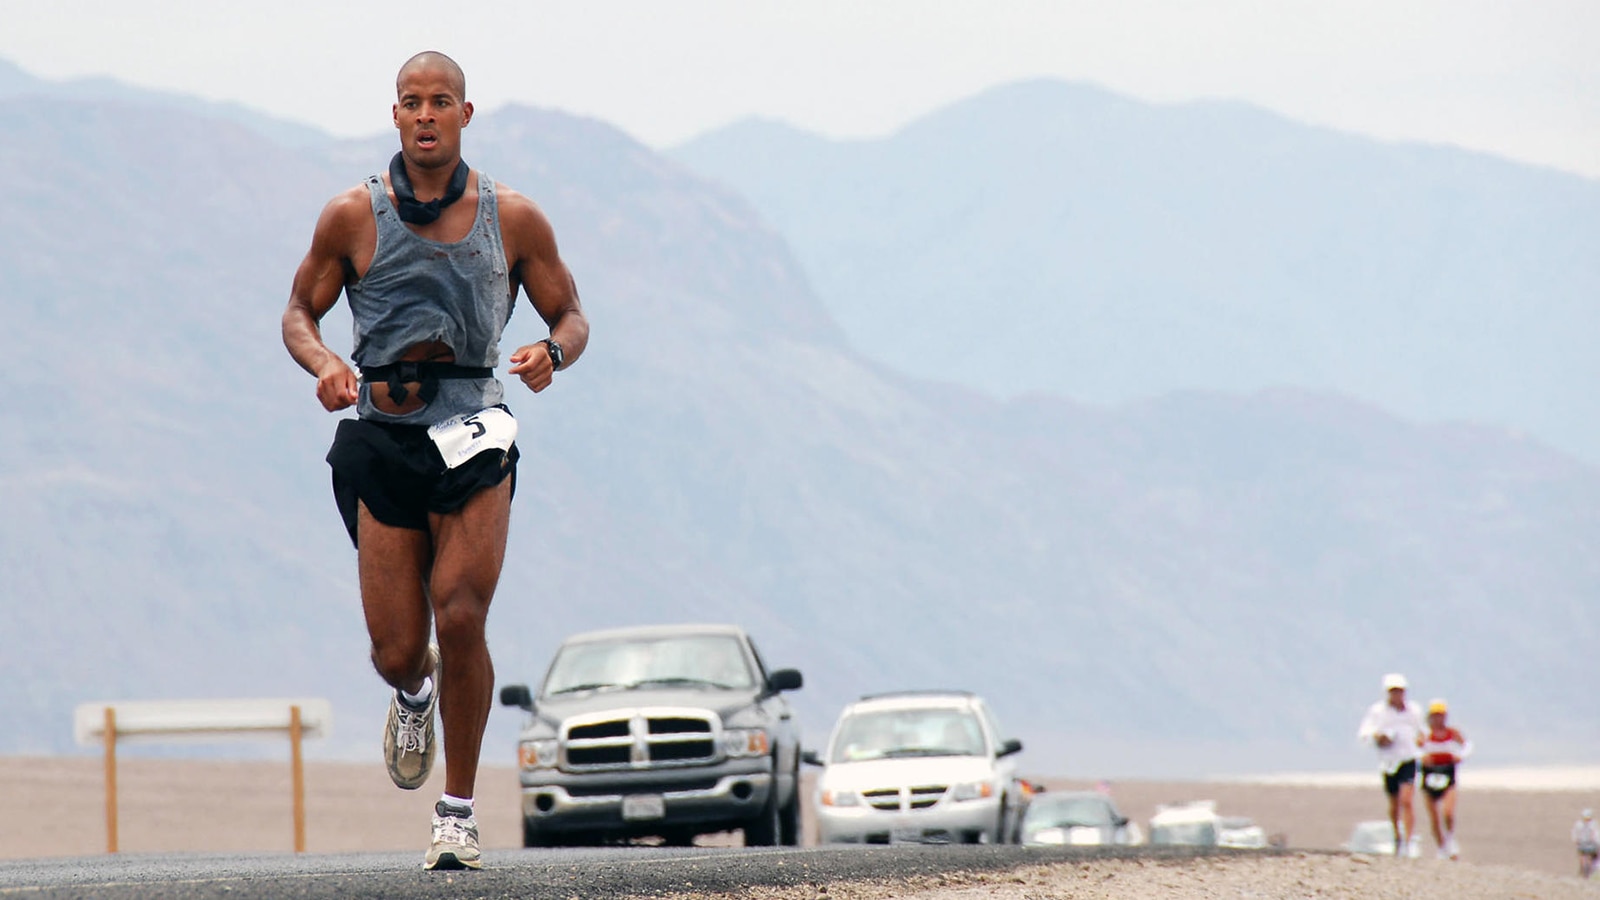 What Kind Of Running Shoes Does David Goggins Wear